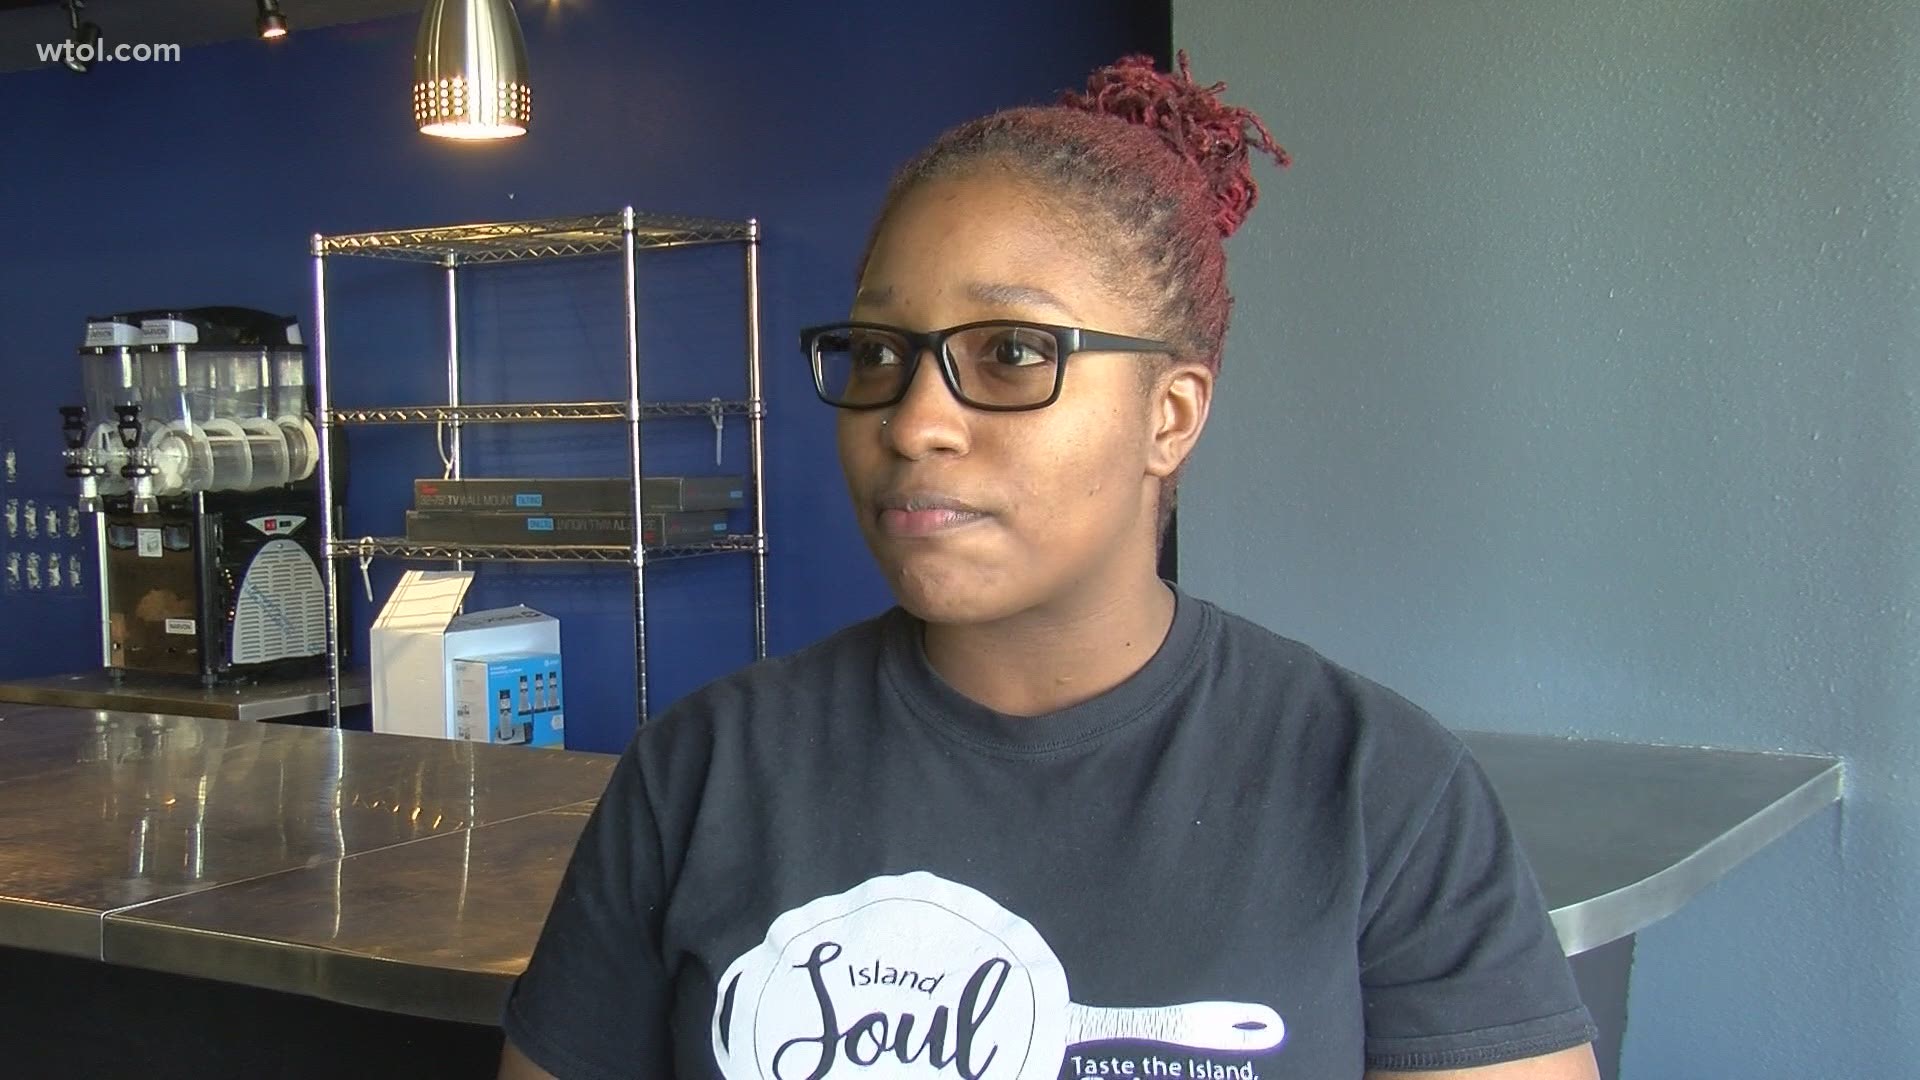 The entrepreneurs say they felt as if minorities were left out of Restaurant Week Toledo, and are aiming to have a bigger presence next year.